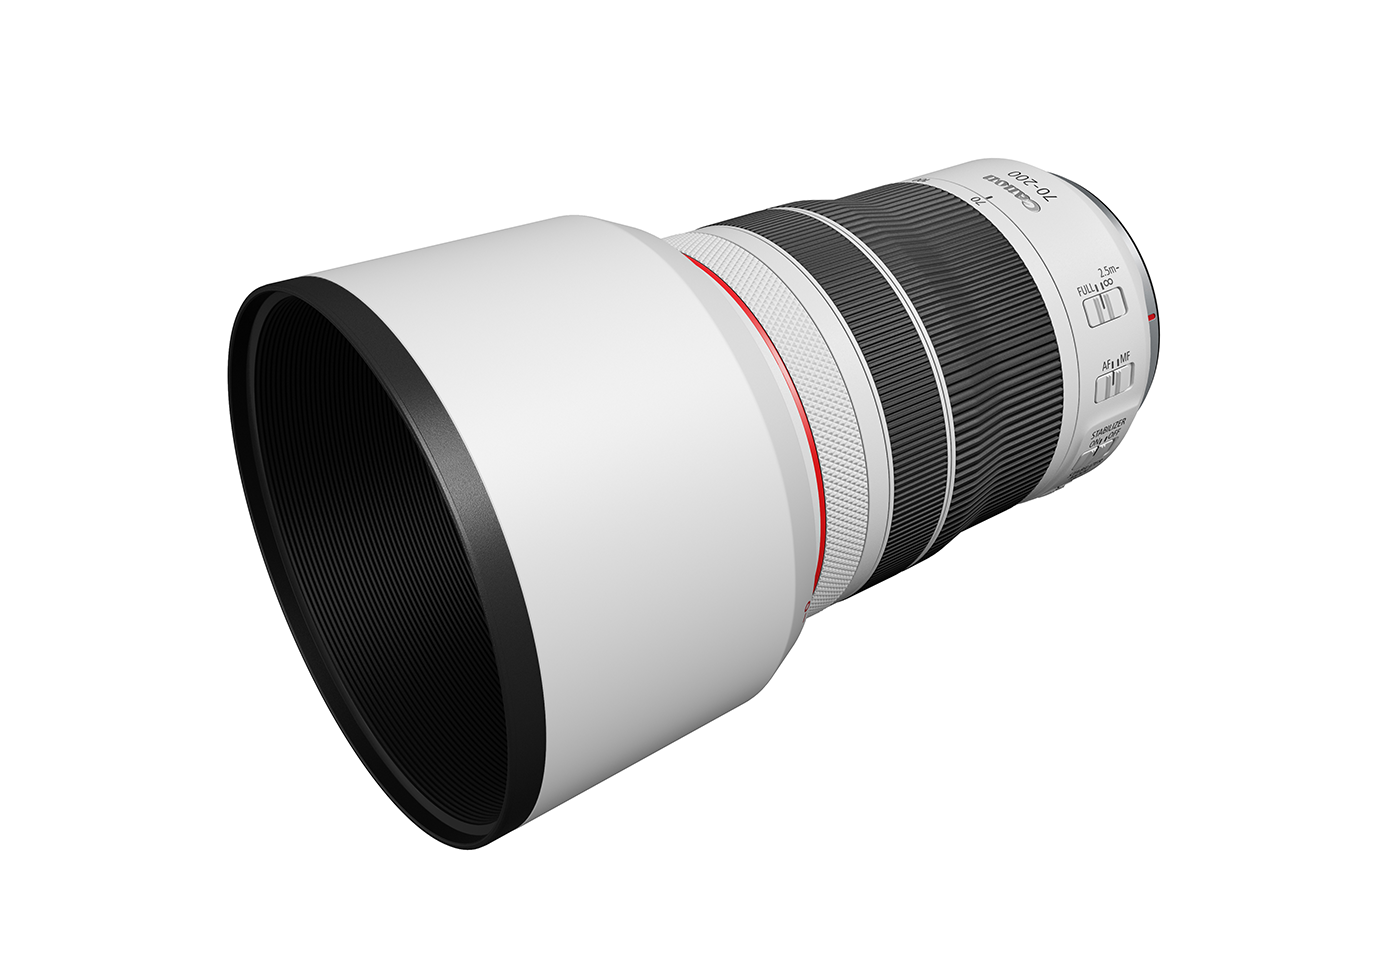 Profile image of RF 70-200mm f/4 L IS USM telephoto lens with hood